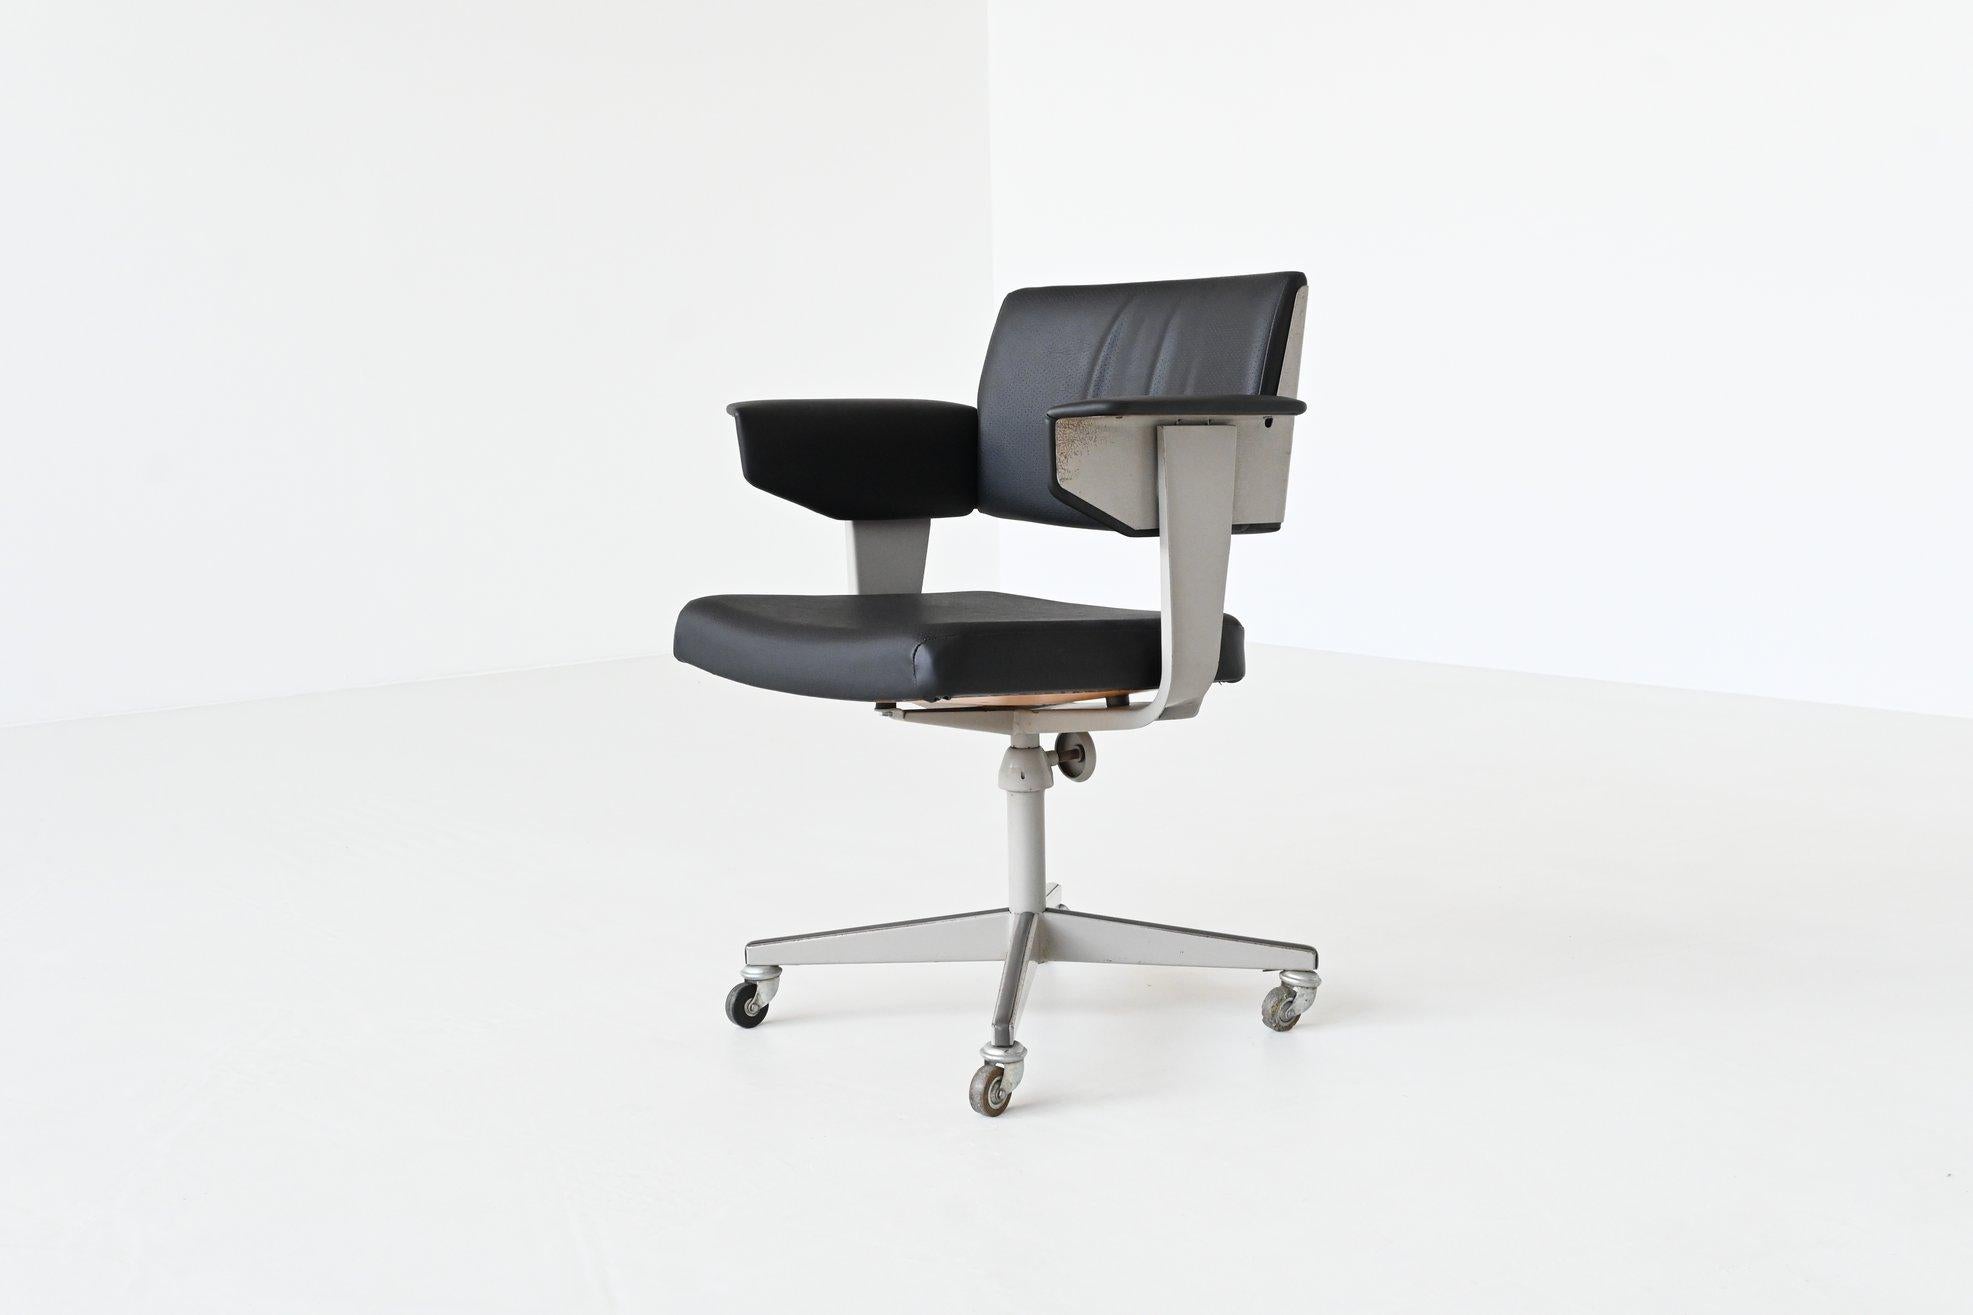 Very nice and rare industrial Resort desk chair designed by Friso Kramer and manufactured by Ahrend de Cirkel, The Netherlands 1960. The chair has a light grey lacquered metal frame with cross legs and wheels. The seat, back and arms are upholstered